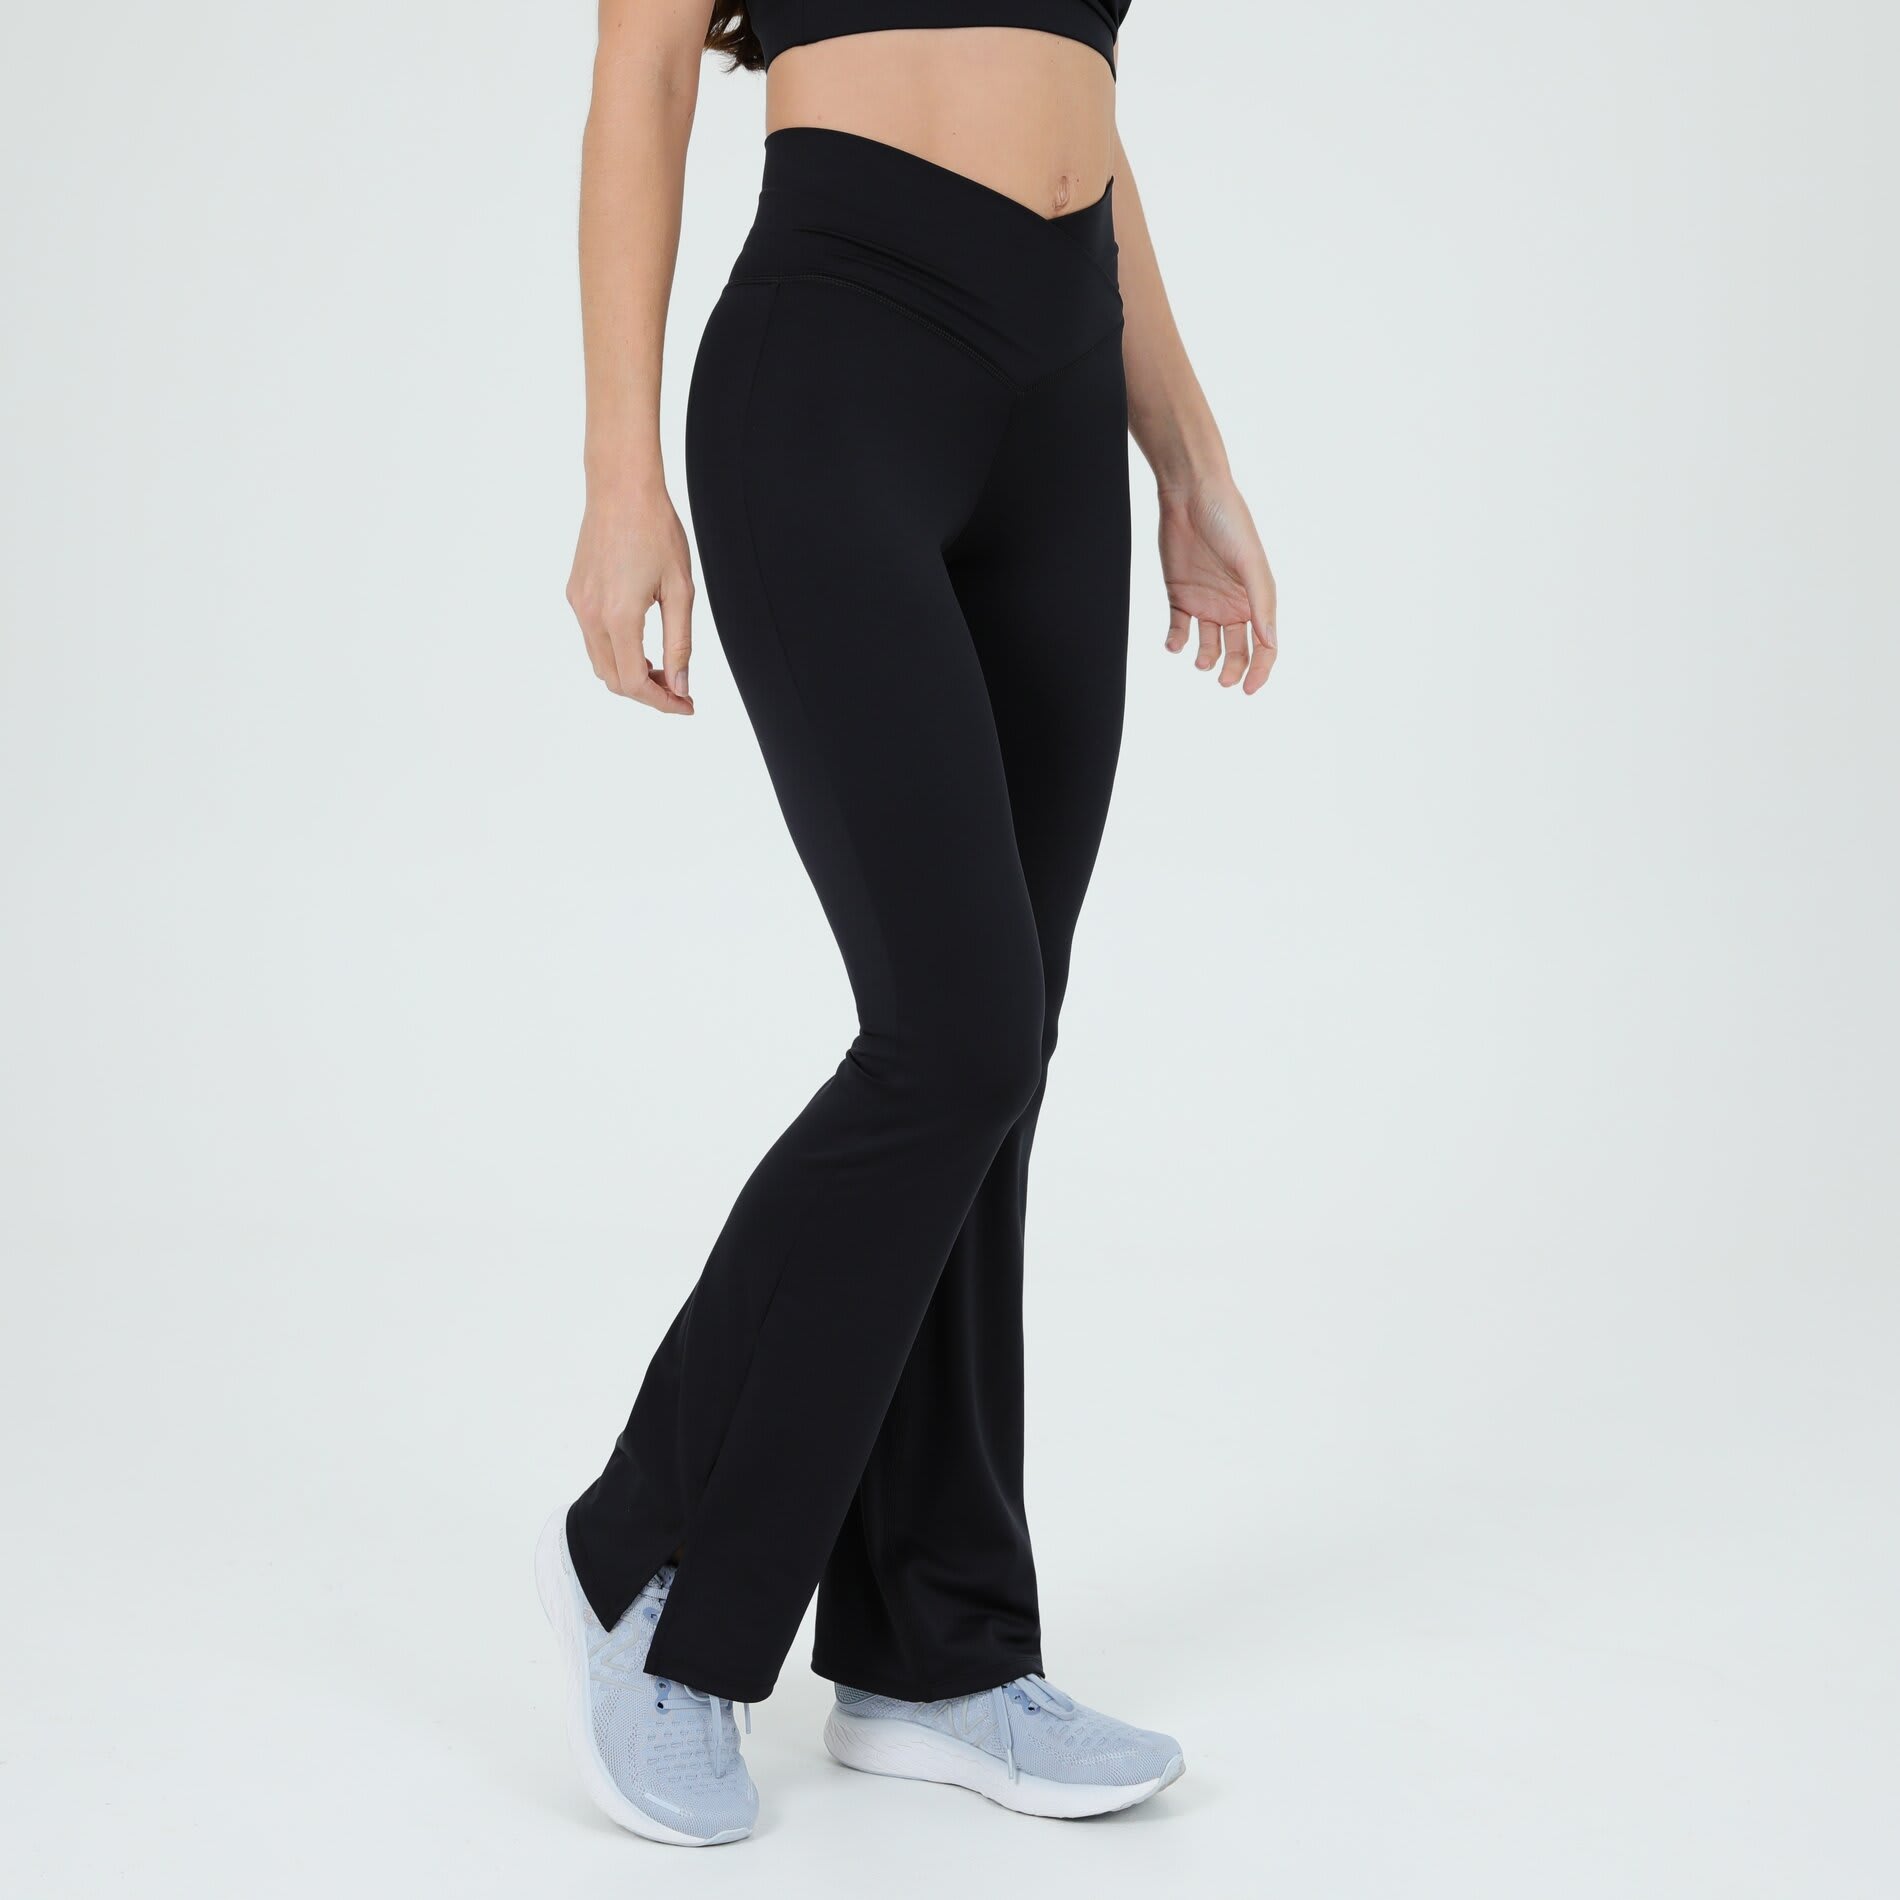 OTG Women's Fit & Flare Pant, by OTG Essentials